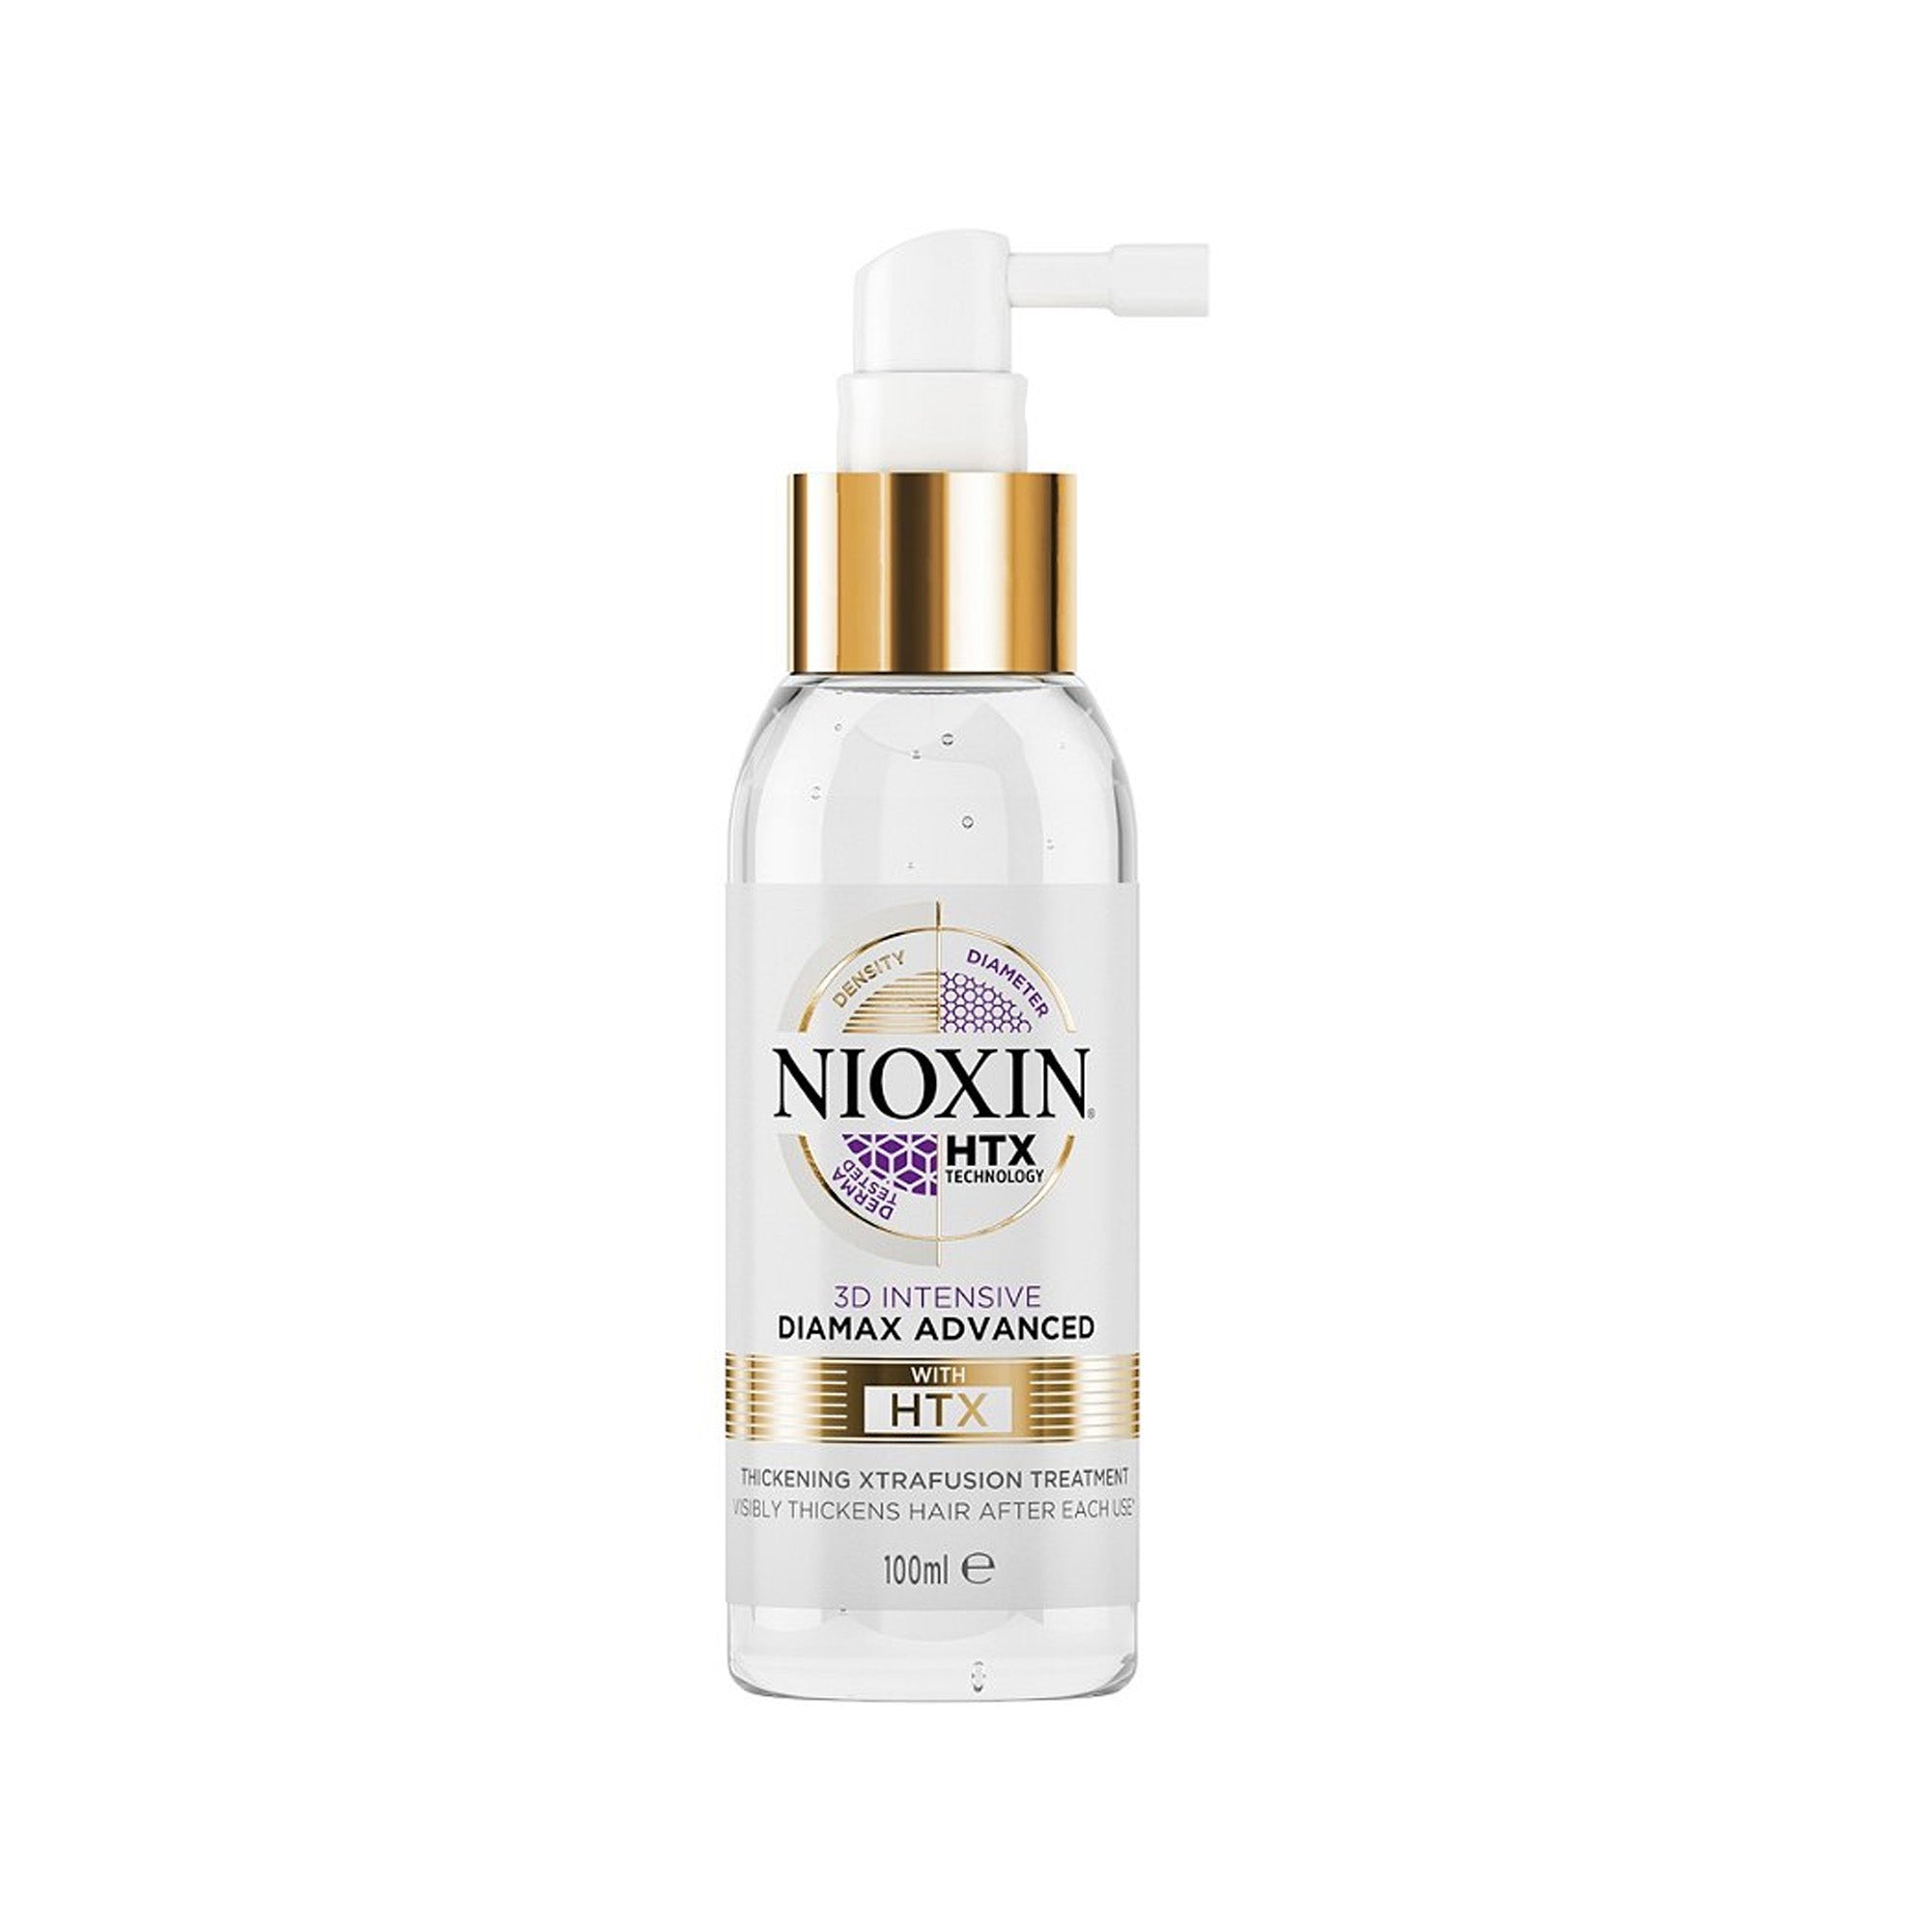 Nioxin Diamax Advanced, Hair Thickening & Breakage Protection Treatment For Thinning Hair